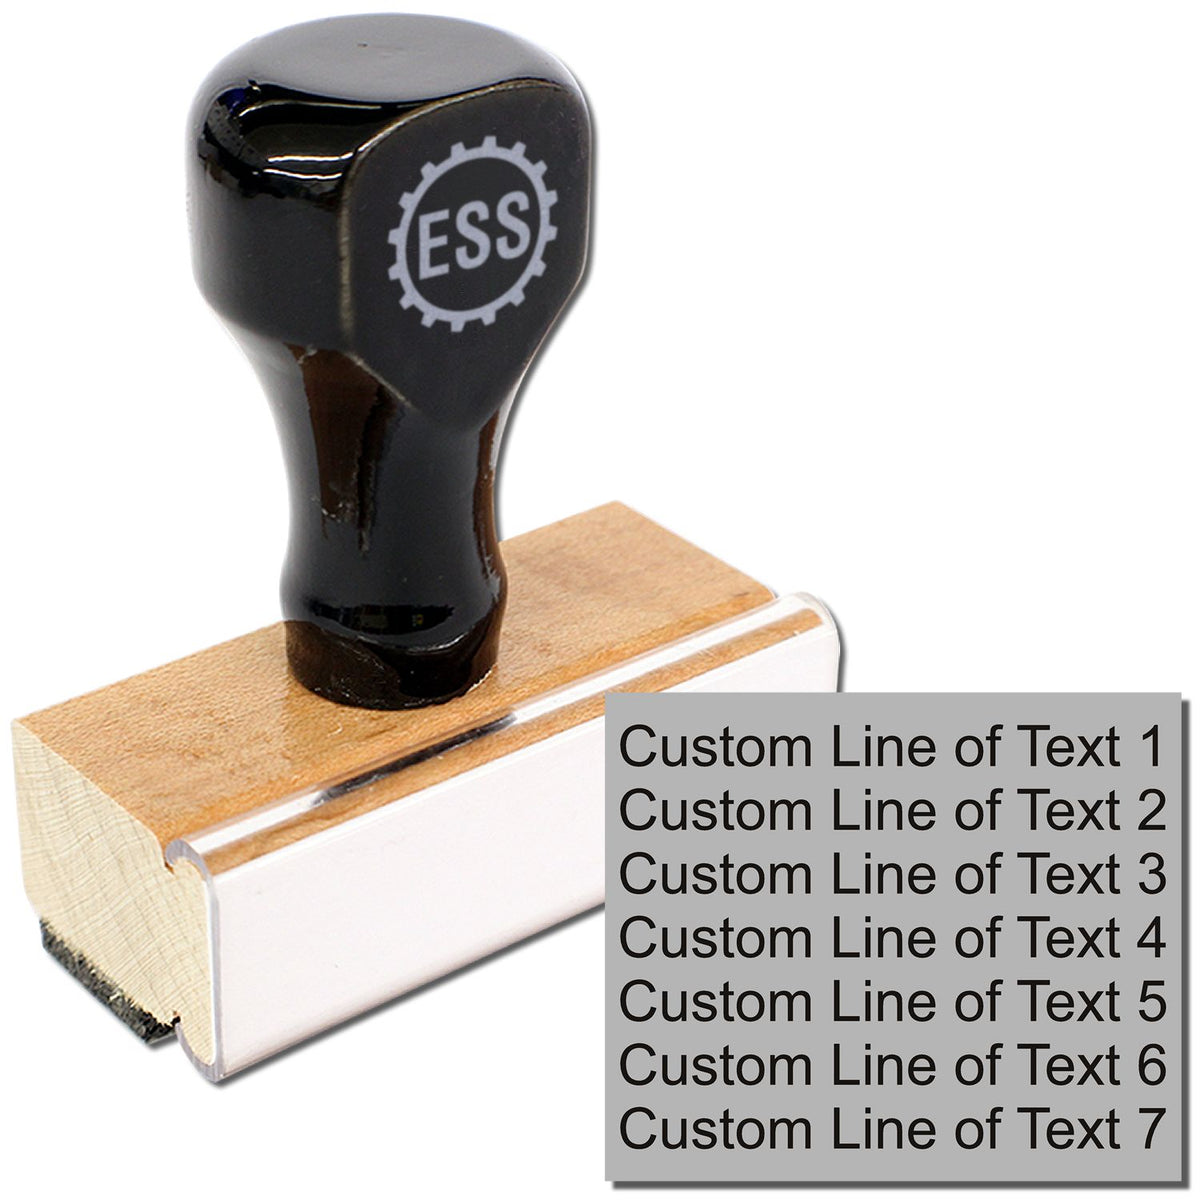 7 Line Custom Rubber Stamp with Wood Handle